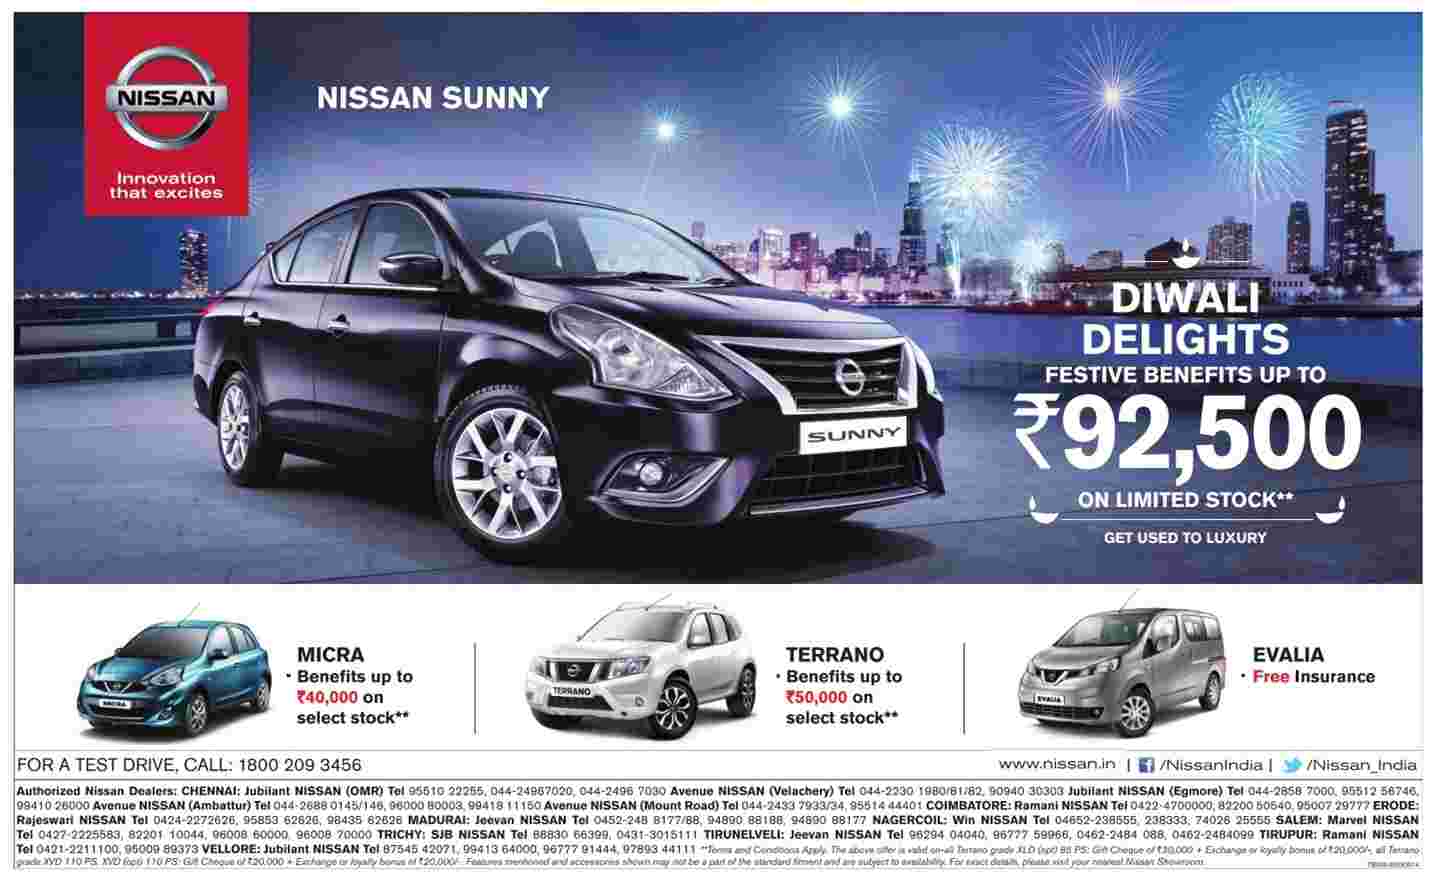 Nissan Diwali Offers and Discount on Cars